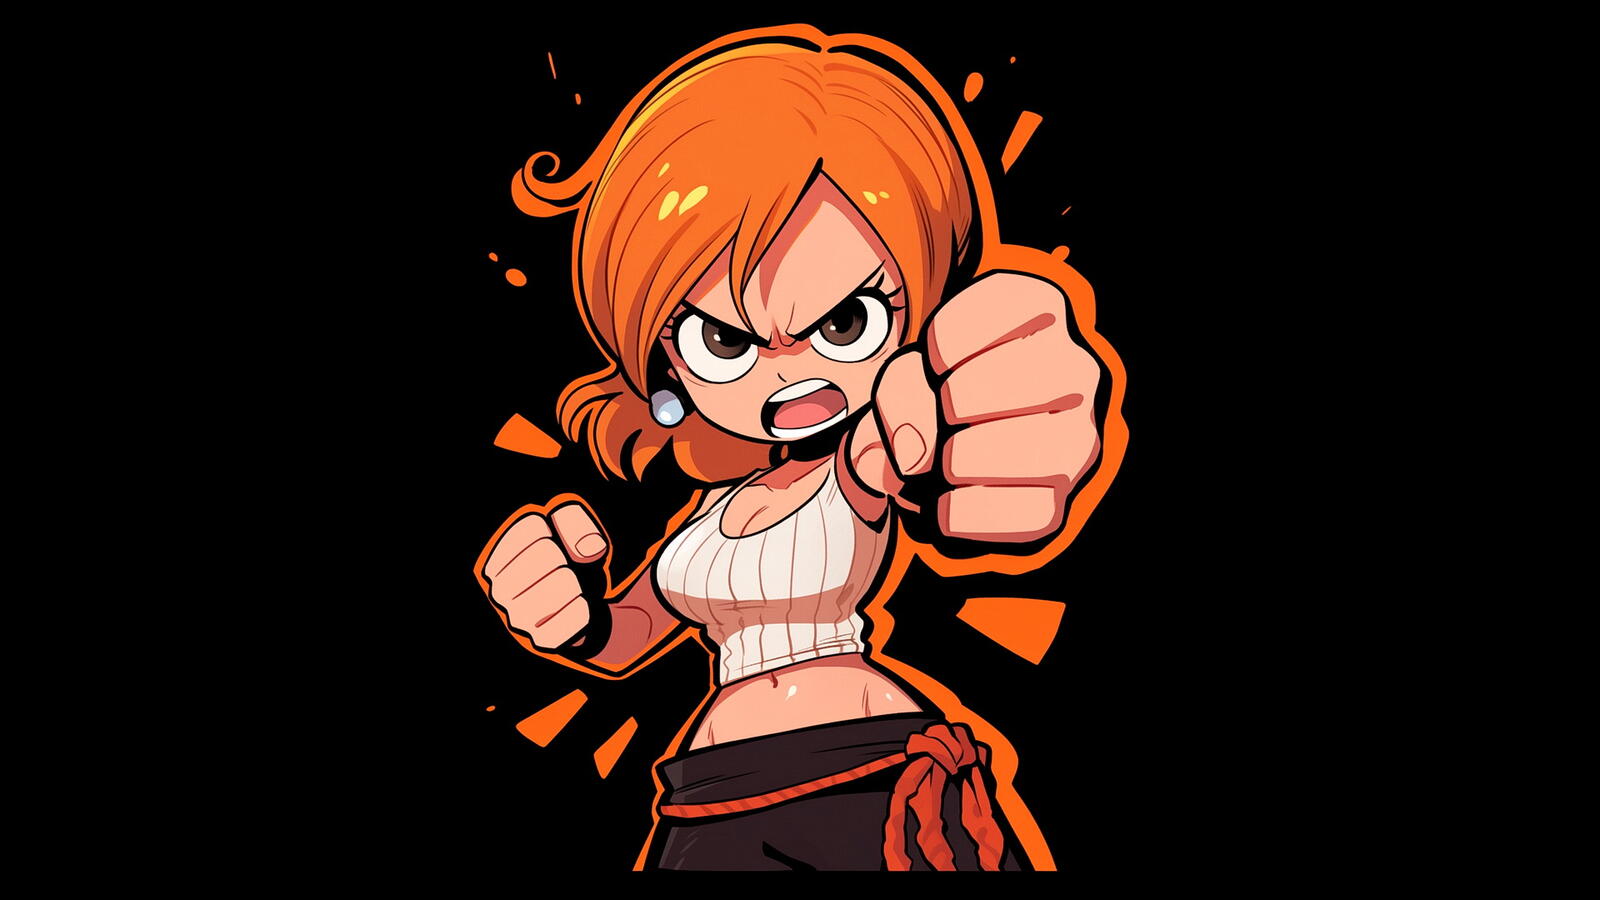 Free photo A drawing of a girl fighter on a black background